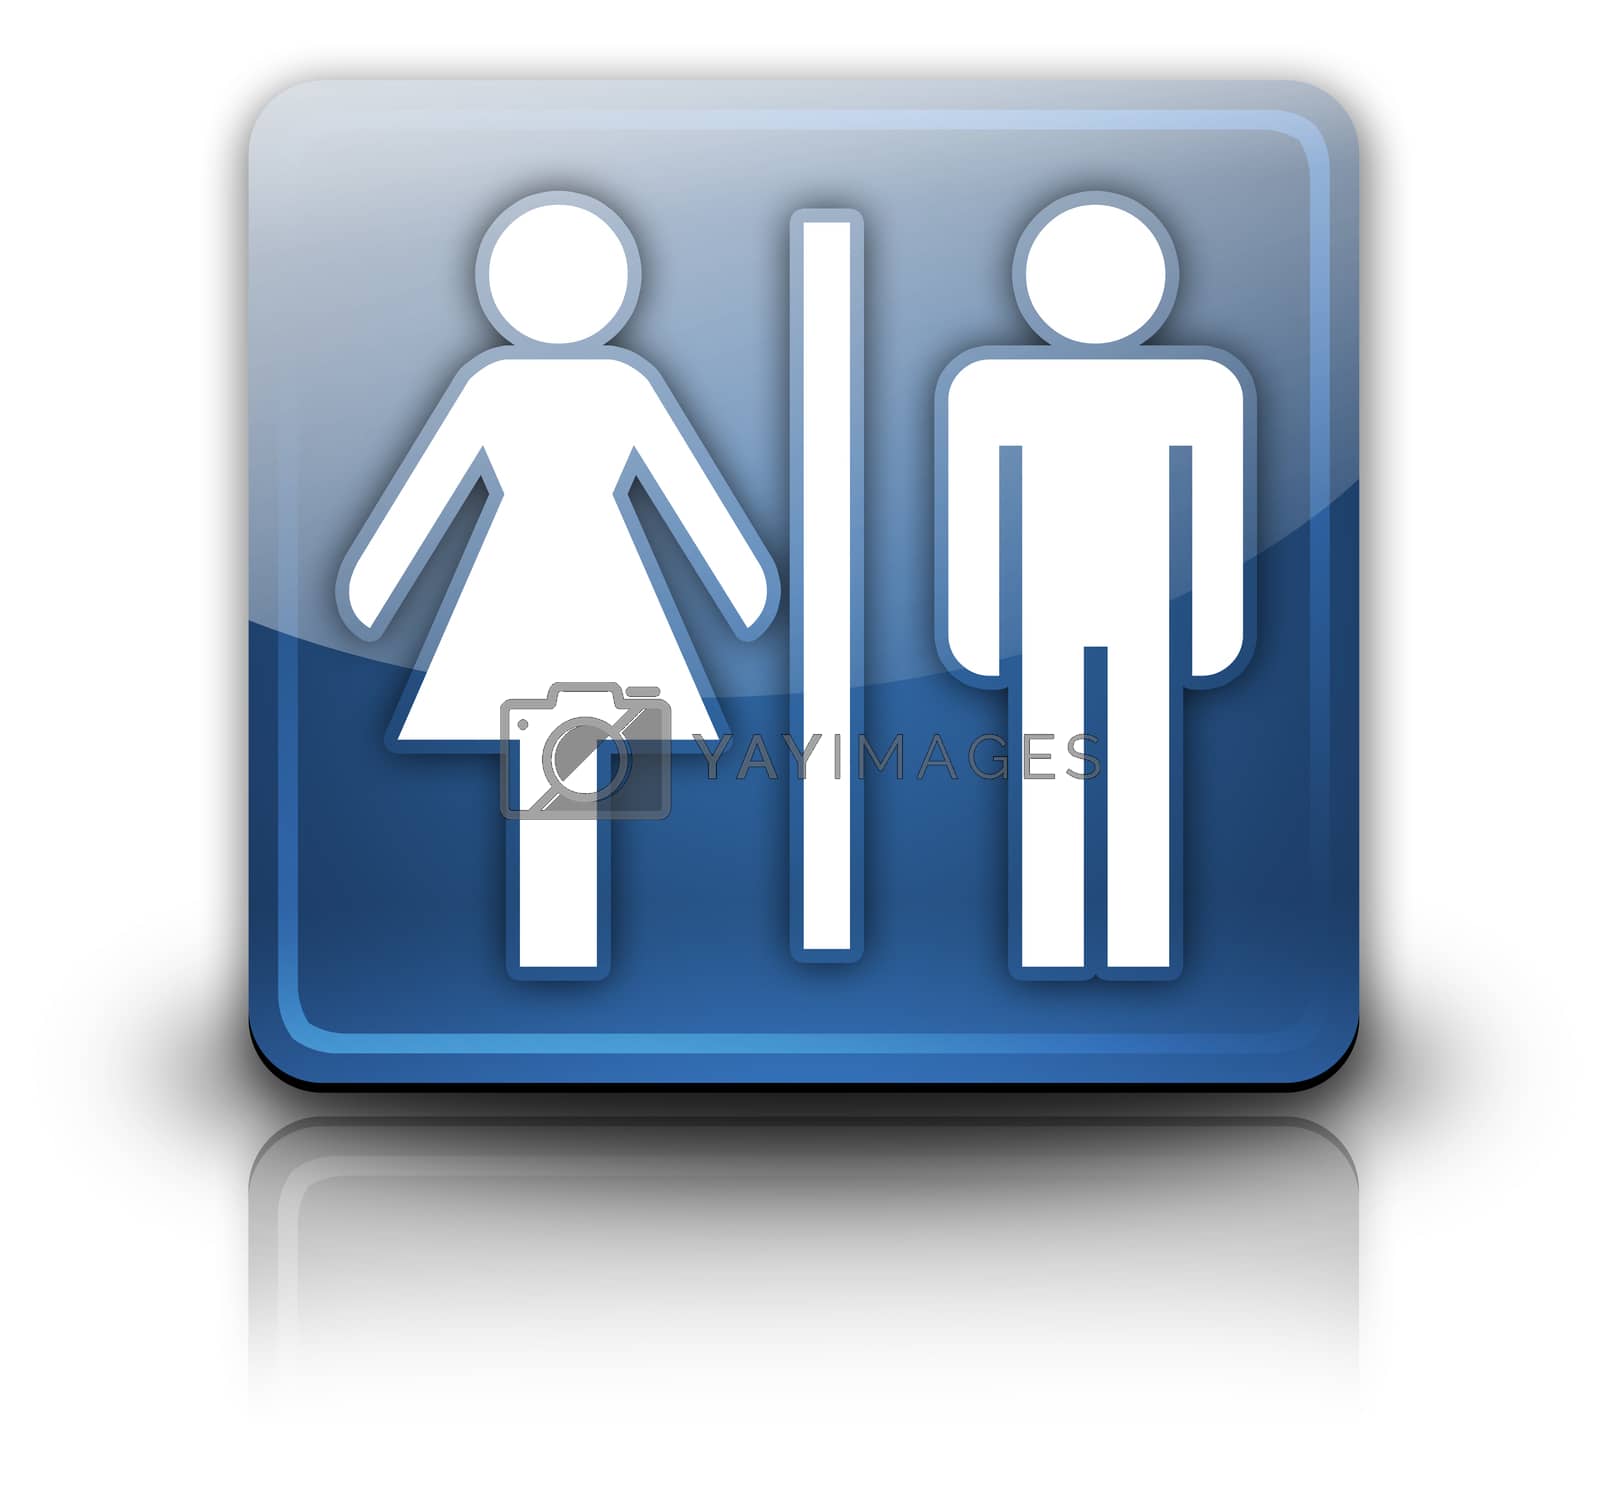 Royalty free image of Icon, Button, Pictogram Restrooms by mindscanner